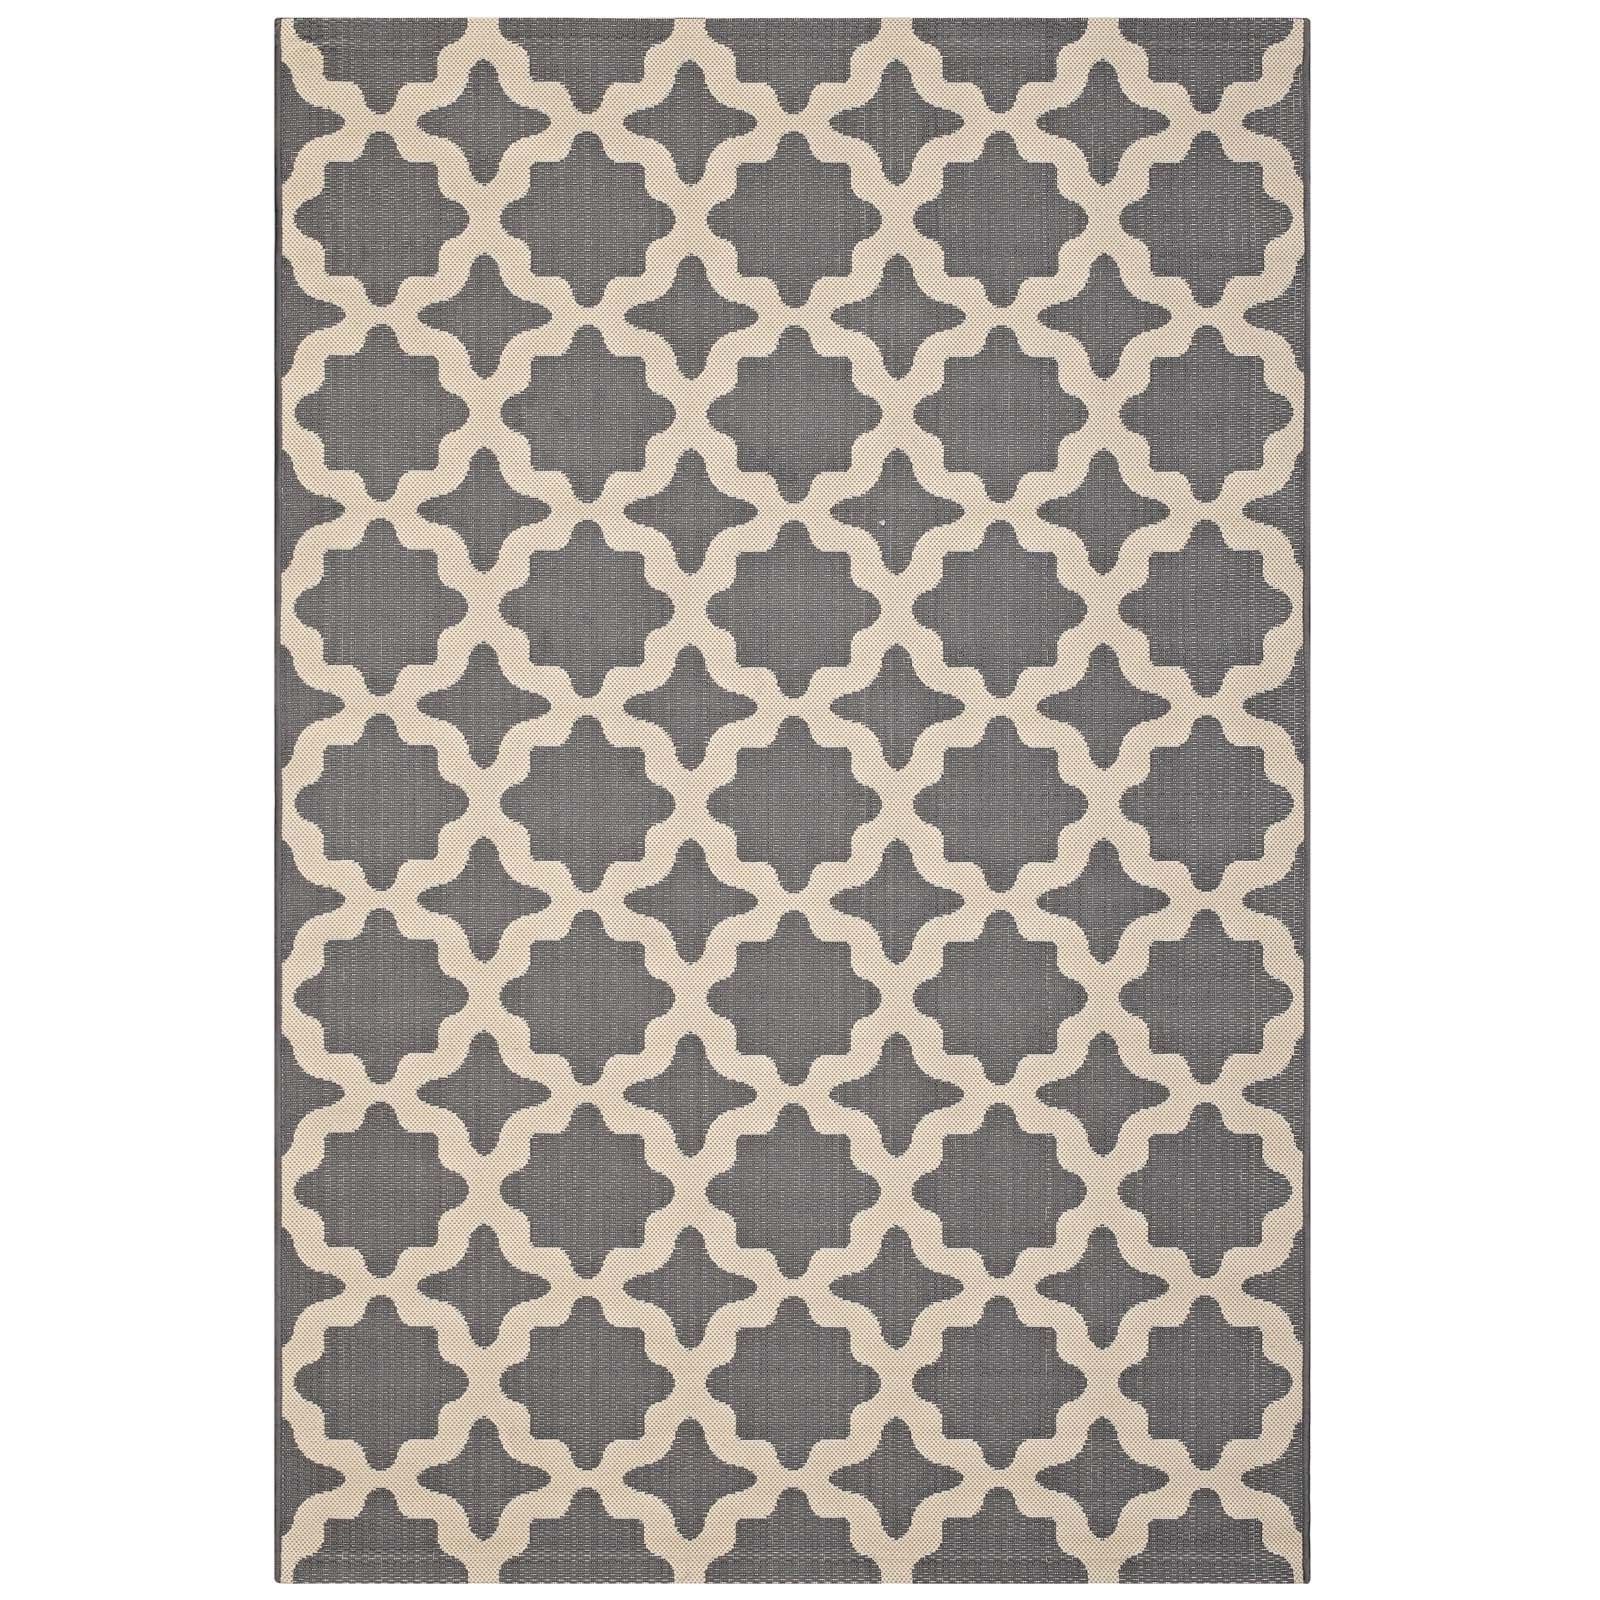 Latest Cerelia Moroccan Trellis 5x8 Indoor And Outdoor Area Rug In Gray And With Gray And Beige Trellis Cylinder Pouf Ottomans (View 4 of 10)